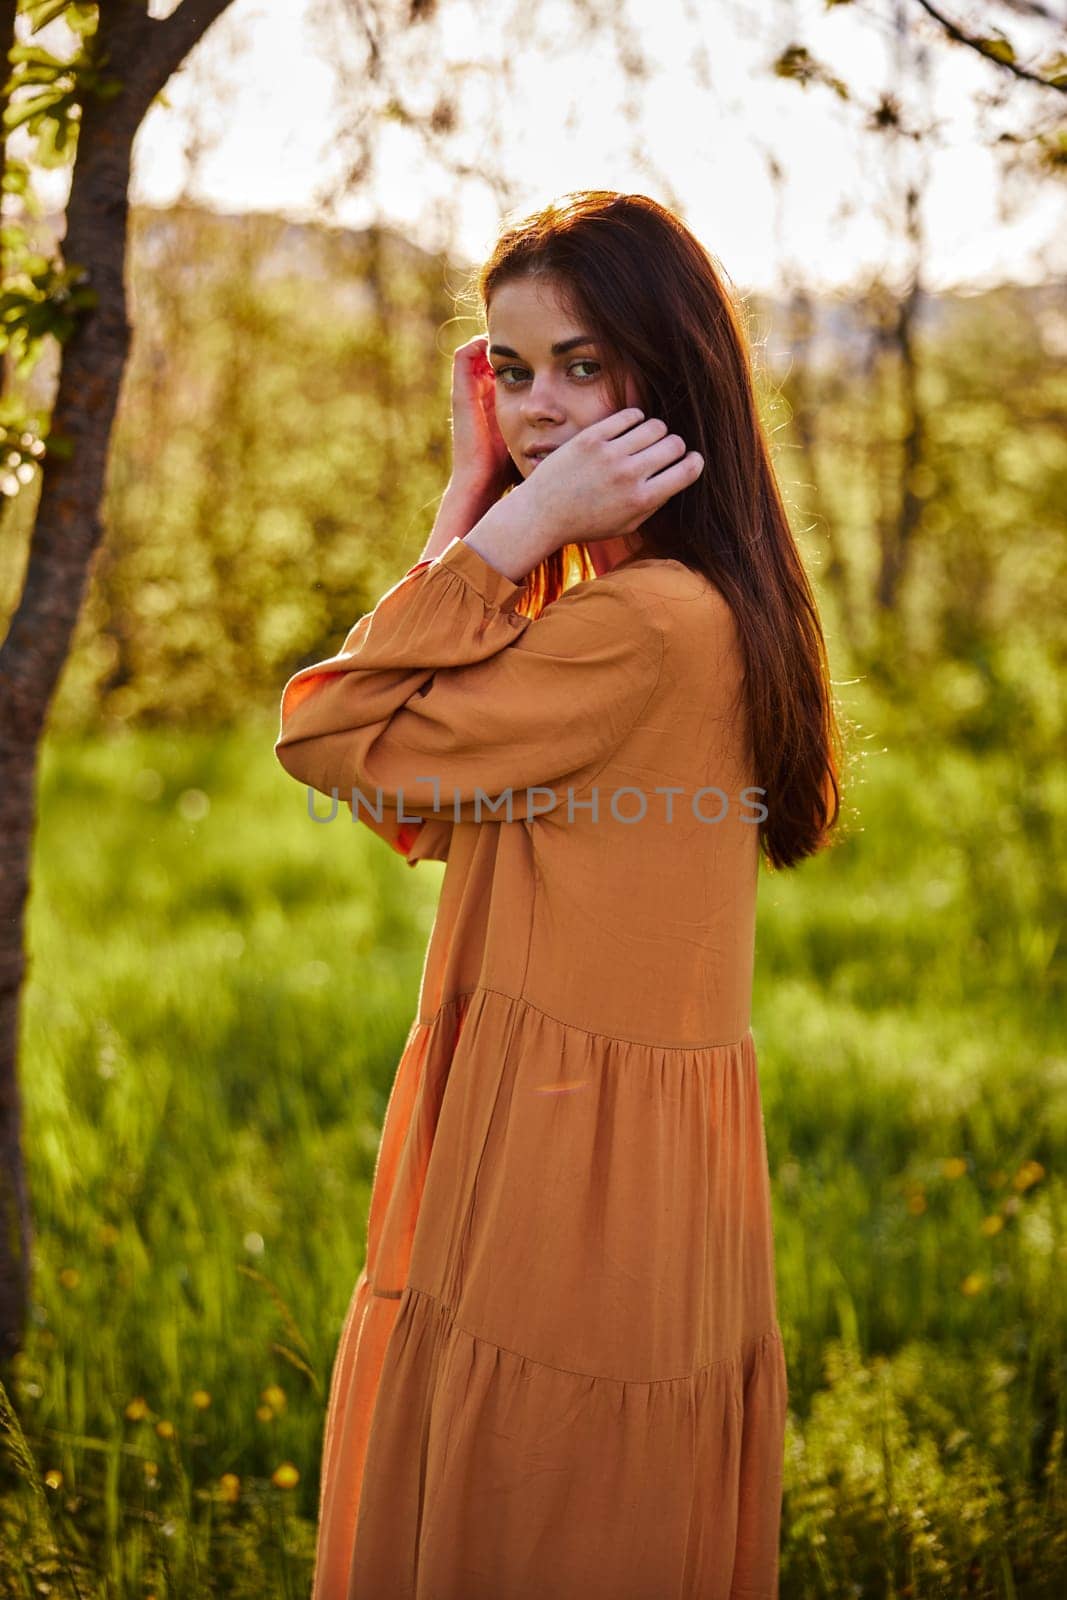 a sweet, thoughtful woman stands in nature near a tree in a long orange dress, illuminated from the back by the sunset rays of the sun and holding her hand near her face looks towards the camera by Vichizh